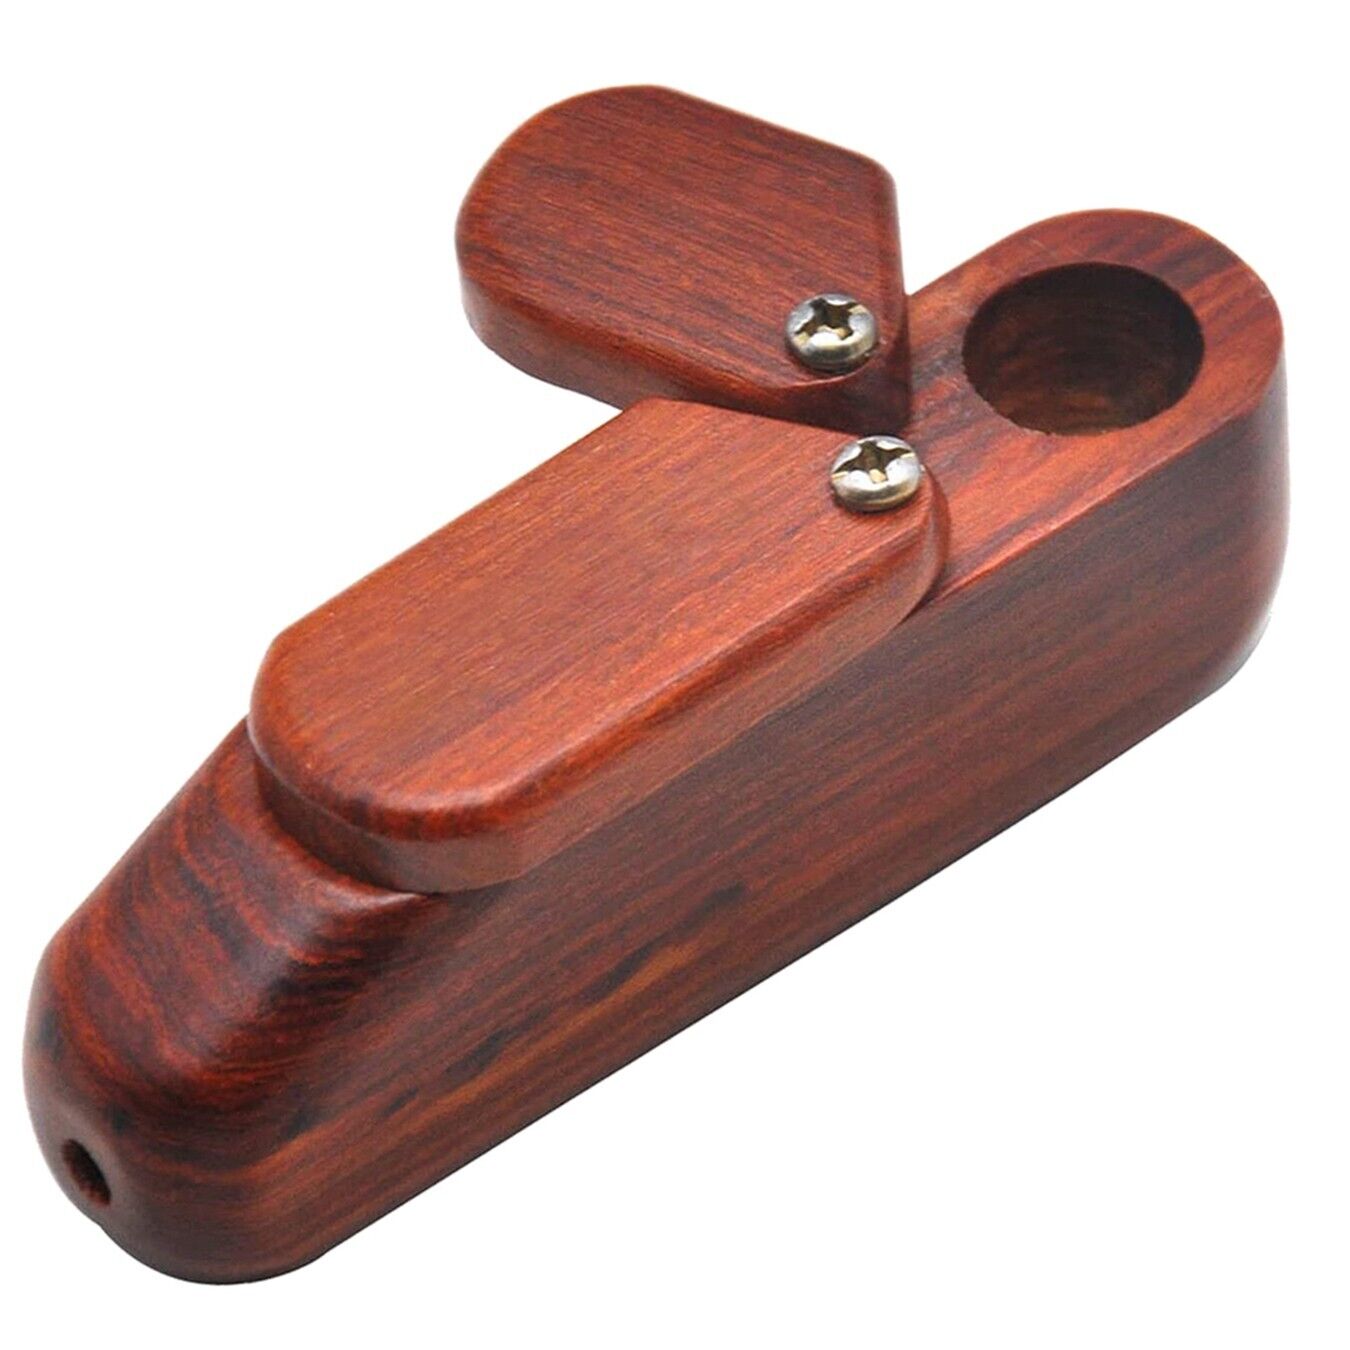 New Rotary Cover Wooden Smoking Pipe Portable Wood Pipe with Tobacco Storage Box